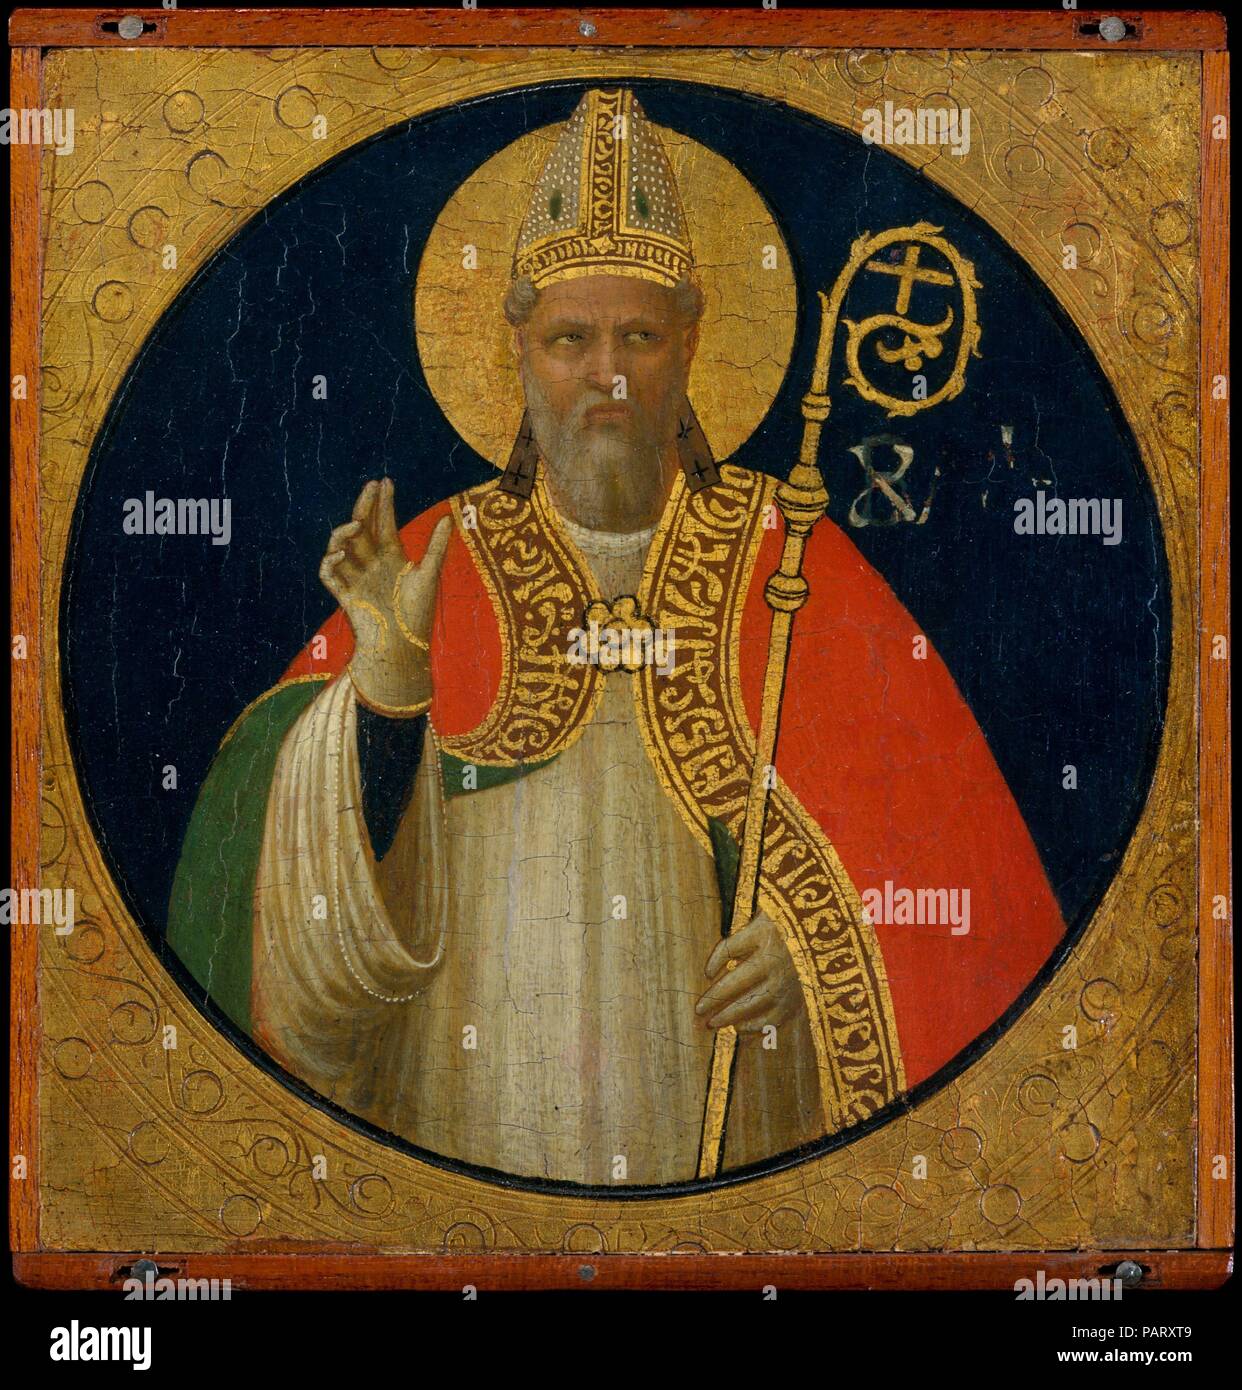 A Bishop Saint. Artist: Fra Angelico (Guido di Pietro) (Italian, Vicchio di Mugello ca. 1395-1455 Rome). Dimensions: Overall 6 1/4 x 6 1/8 in. (15.9 x 15.6 cm); diameter of roundel 5 7/8 in. (14.9 cm). Date: ca. 1425.  This early work by Fra Angelico dates about 1425 and formed part of the decoration of the frame of an altarpiece still in the church of San Domenico, Fiesole, where the artist was a friar until 1436. The altarpiece was modernized in 1501, and parts of its frame were sold in the nineteenth century. The elegant figure type and delicate modeling owe much to the example of Ghiberti, Stock Photo